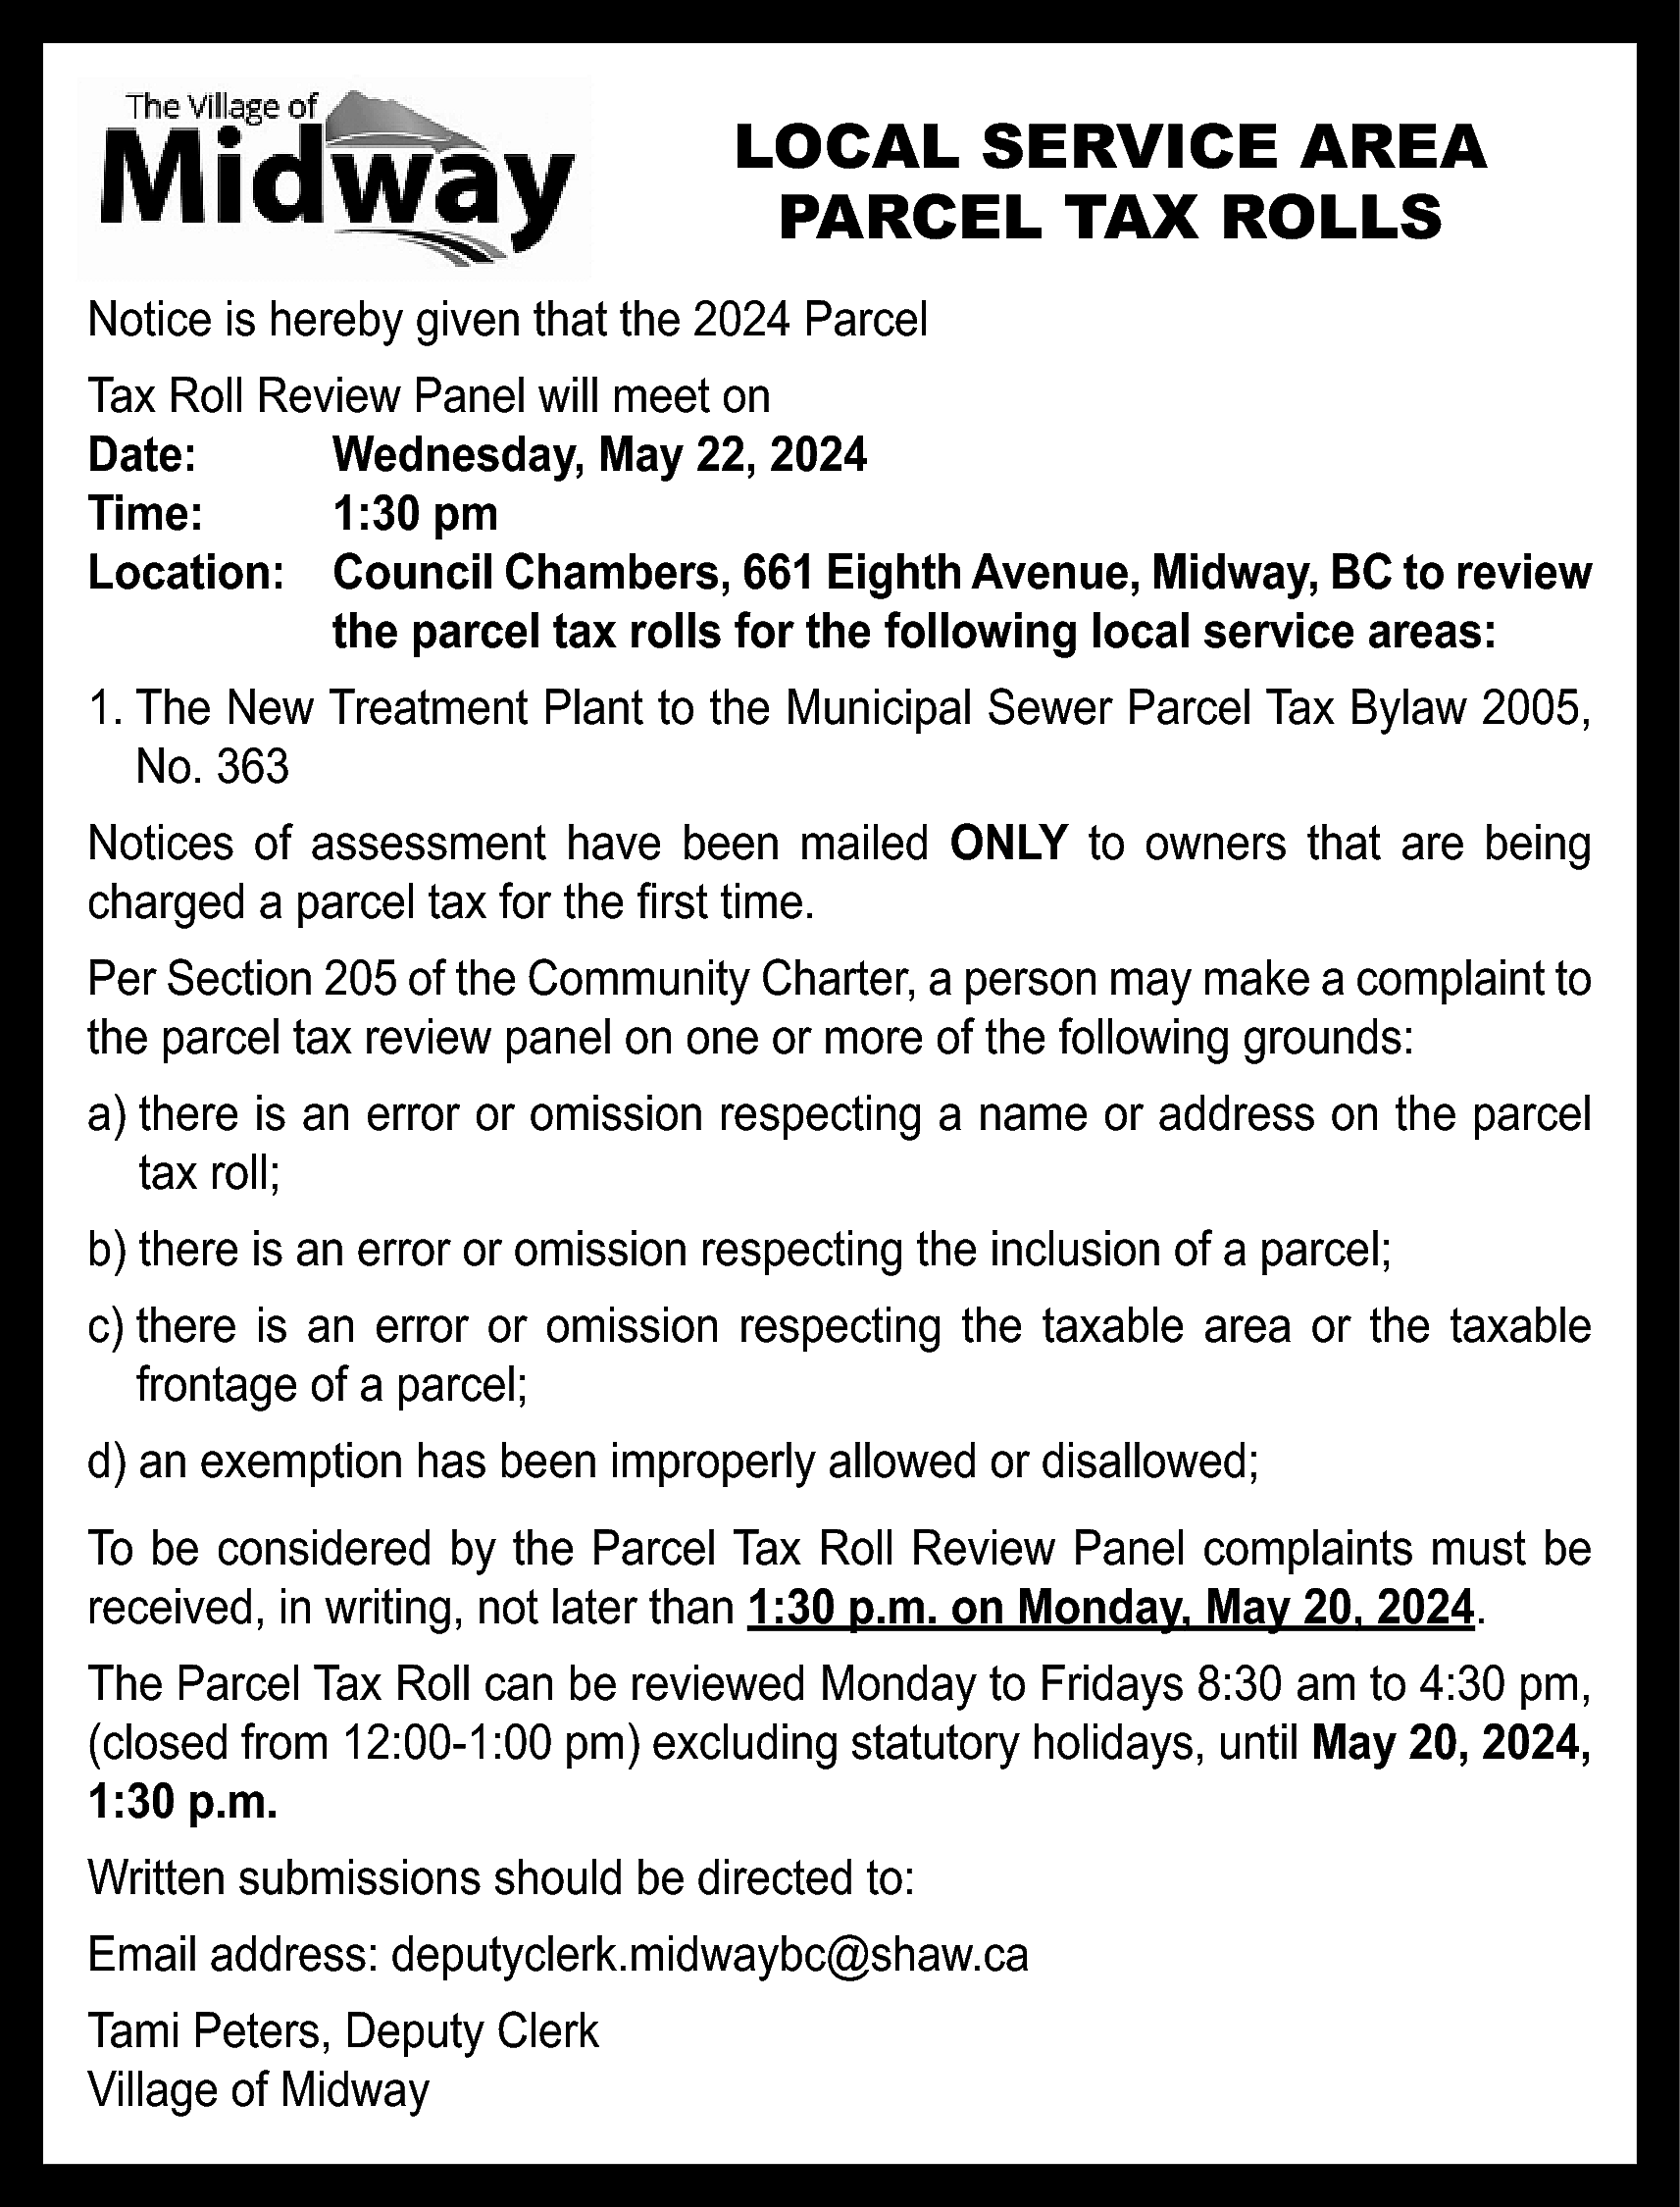 LOCAL SERVICE AREA <br>PARCEL TAX  LOCAL SERVICE AREA  PARCEL TAX ROLLS  Notice is hereby given that the 2024 Parcel  Tax Roll Review Panel will meet on  Date:  Wednesday, May 22, 2024  Time:  1:30 pm  Location: Council Chambers, 661 Eighth Avenue, Midway, BC to review  the parcel tax rolls for the following local service areas:  1. The New Treatment Plant to the Municipal Sewer Parcel Tax Bylaw 2005,  No. 363  Notices of assessment have been mailed ONLY to owners that are being  charged a parcel tax for the first time.  Per Section 205 of the Community Charter, a person may make a complaint to  the parcel tax review panel on one or more of the following grounds:  a) there is an error or omission respecting a name or address on the parcel  tax roll;  b) there is an error or omission respecting the inclusion of a parcel;  c) there is an error or omission respecting the taxable area or the taxable  frontage of a parcel;  d) an exemption has been improperly allowed or disallowed;  To be considered by the Parcel Tax Roll Review Panel complaints must be  received, in writing, not later than 1:30 p.m. on Monday, May 20, 2024.  The Parcel Tax Roll can be reviewed Monday to Fridays 8:30 am to 4:30 pm,  (closed from 12:00-1:00 pm) excluding statutory holidays, until May 20, 2024,  1:30 p.m.  Written submissions should be directed to:  Email address: deputyclerk.midwaybc@shaw.ca  Tami Peters, Deputy Clerk  Village of Midway    